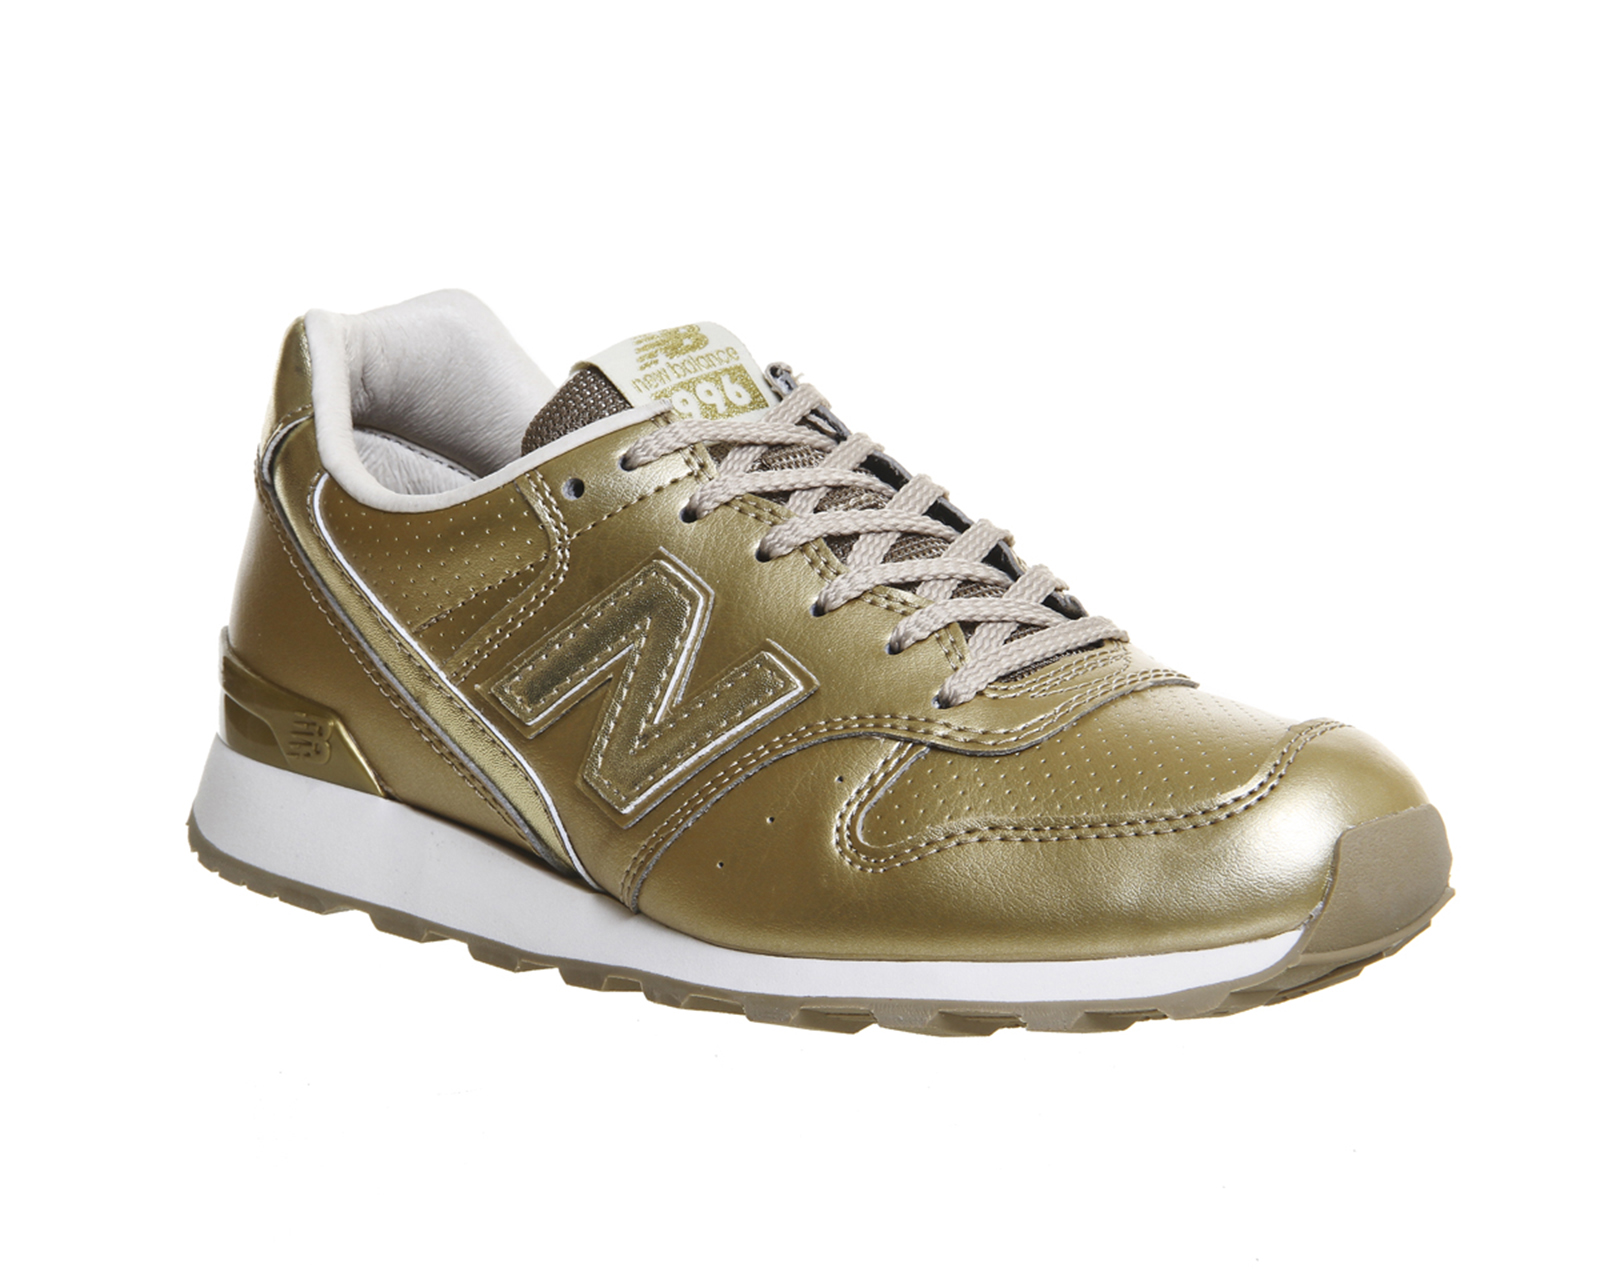 New Balance Gold Shoes Britain, SAVE 36% - aveclumiere.com